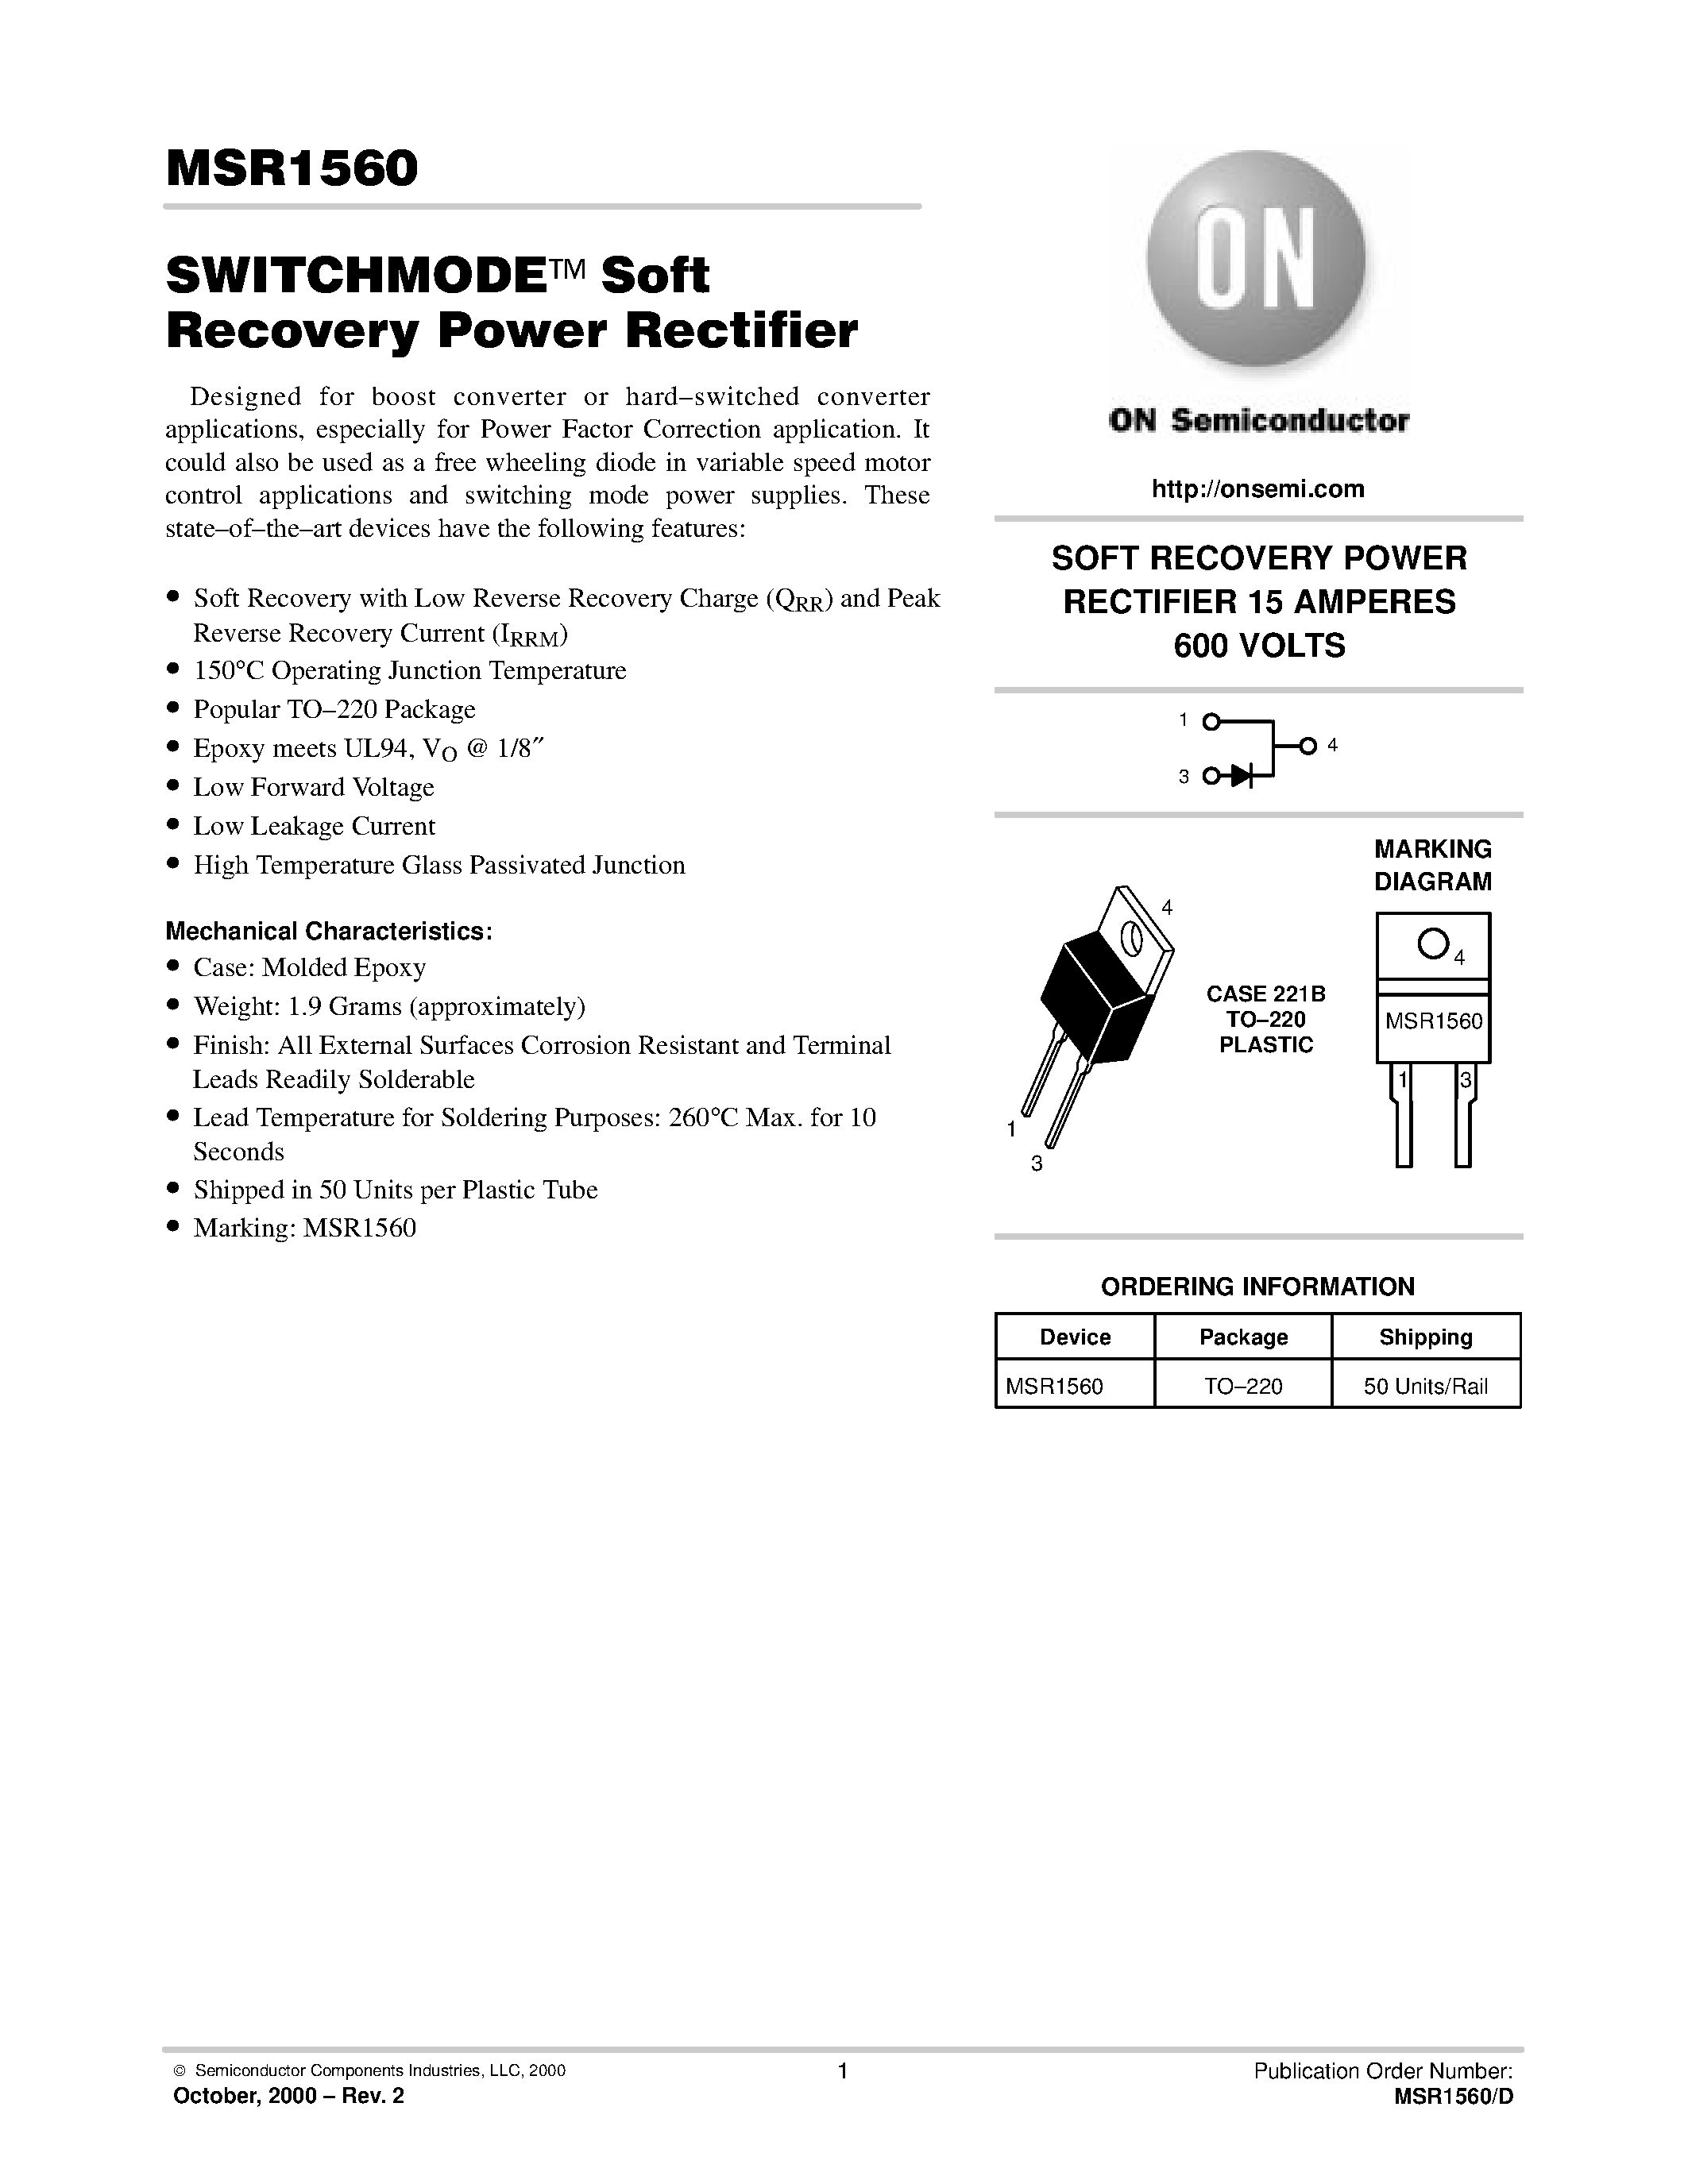 Datasheet MSR1560 - SWITCHMODE Soft Recovery Power Rectifier page 1